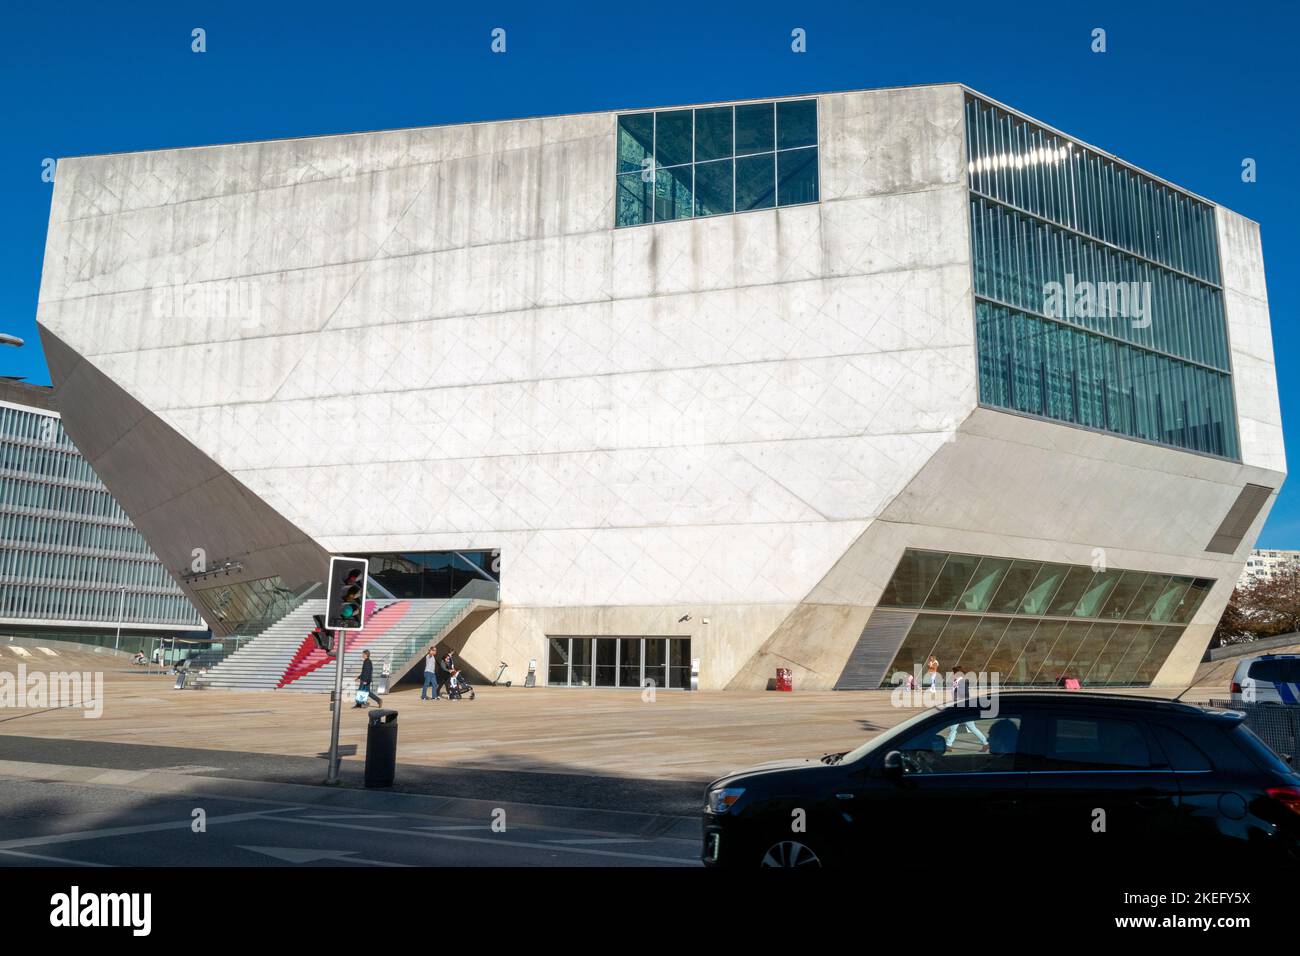 Casa da Música concert hall in Porto, Portugal. It was designed by architect Rem Koolhaas and opened in 2005. Polygon of the Casa da Música concert hall Stock Photo